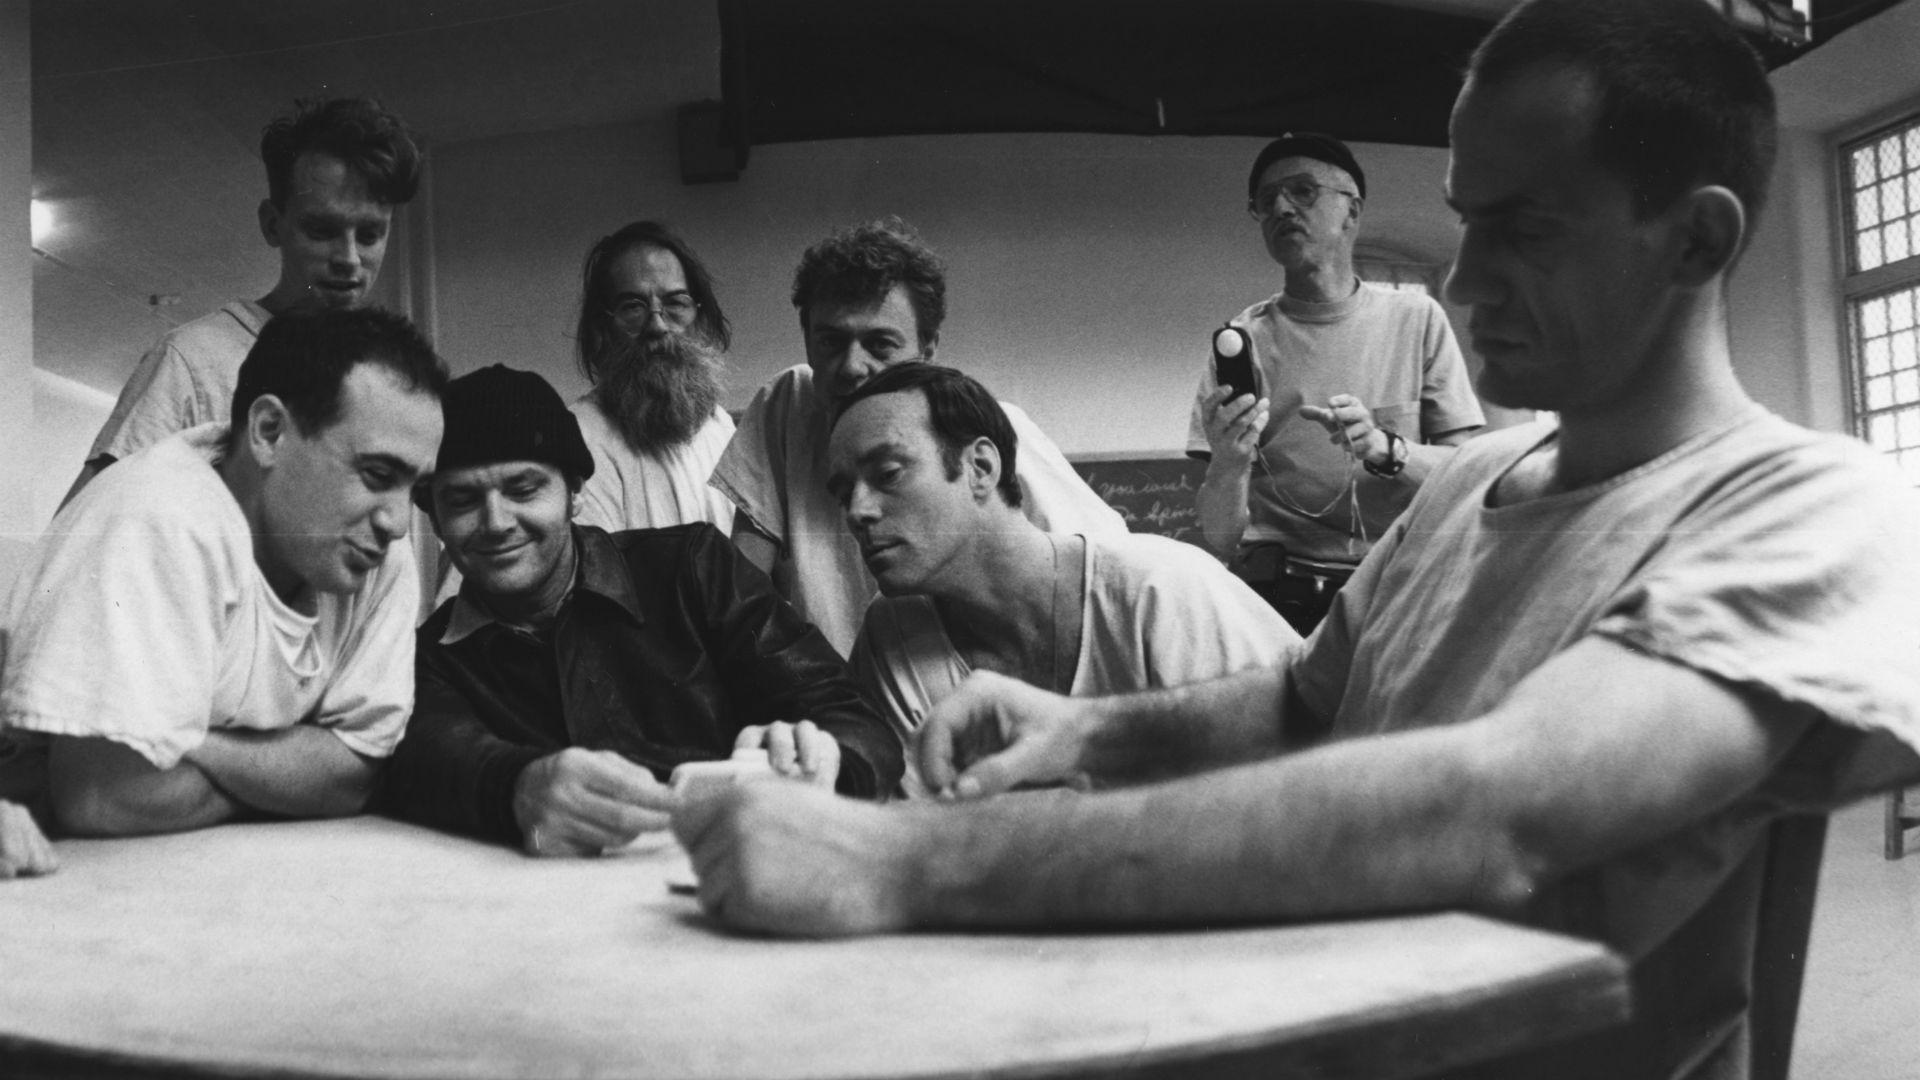 How One Flew Over the Cuckoo’s Nest incubated a generation of